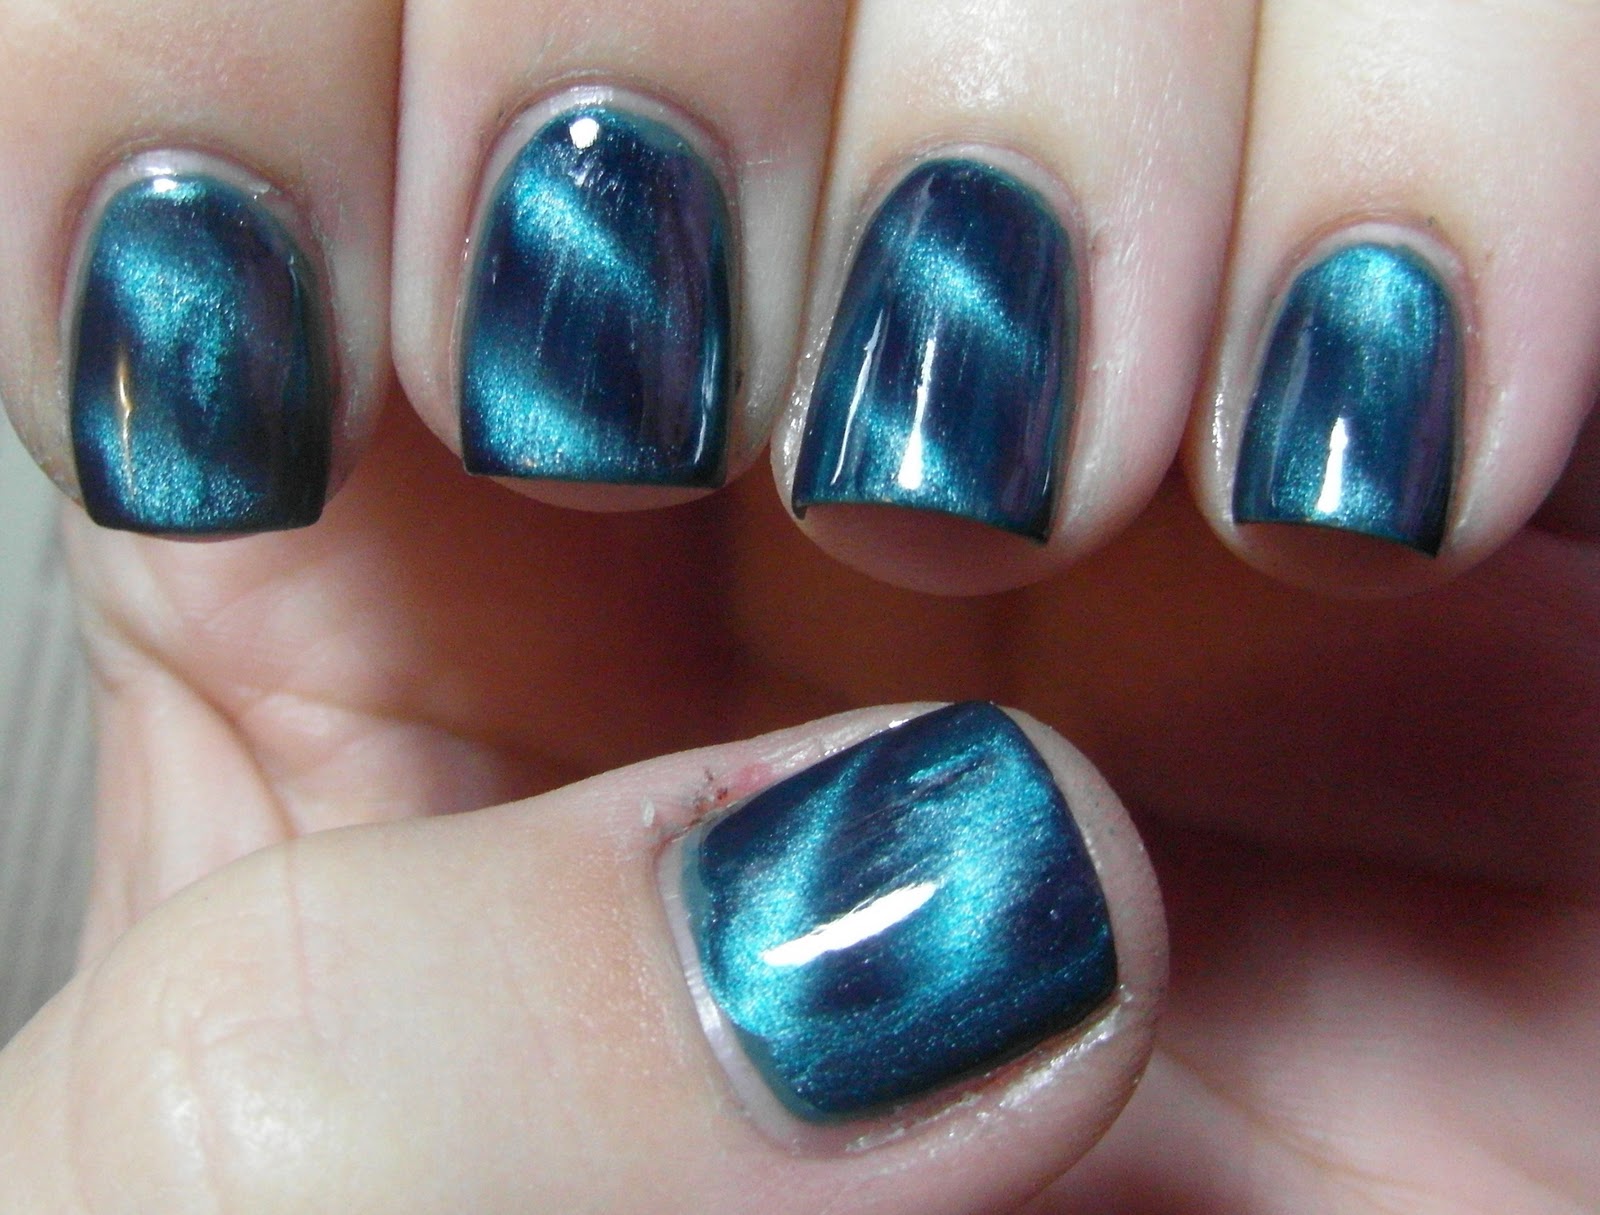 7. "Magnetic" Nail Polish - wide 2